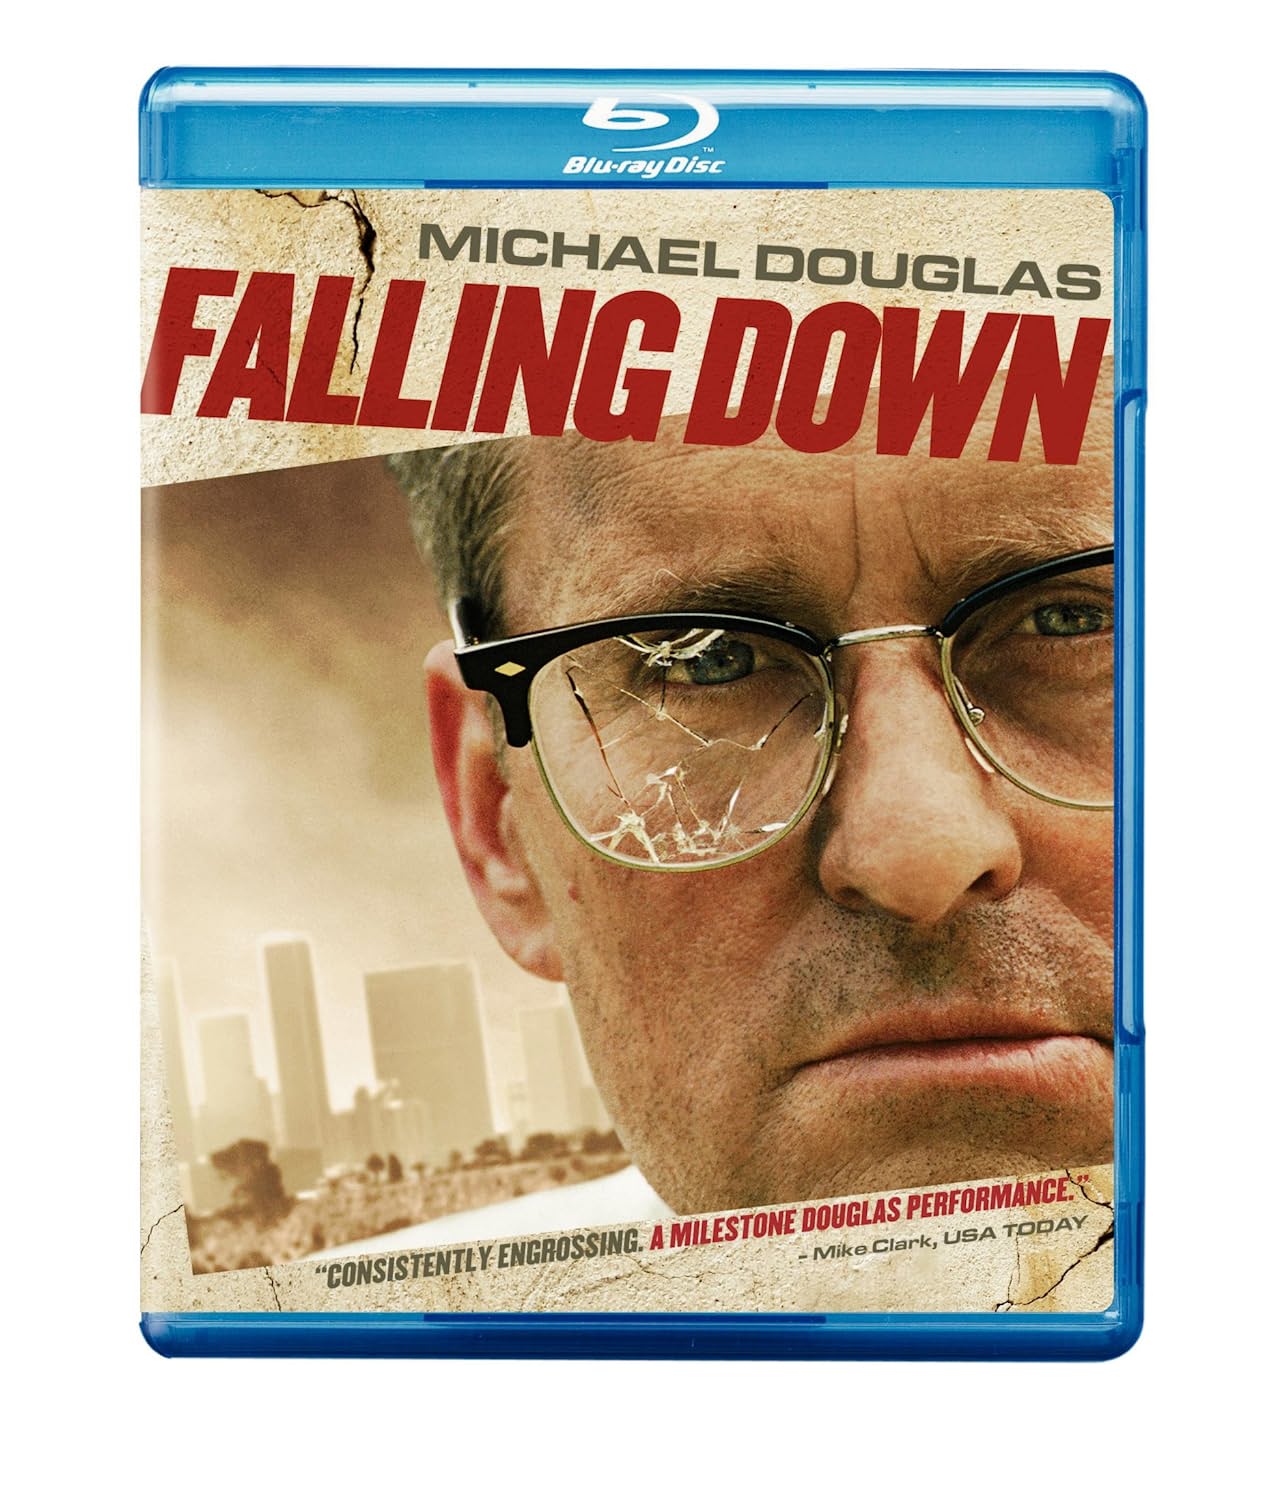 Falling Down - Blu-ray [ 1993 ]  - Action Movies On Blu-ray - Movies On GRUV